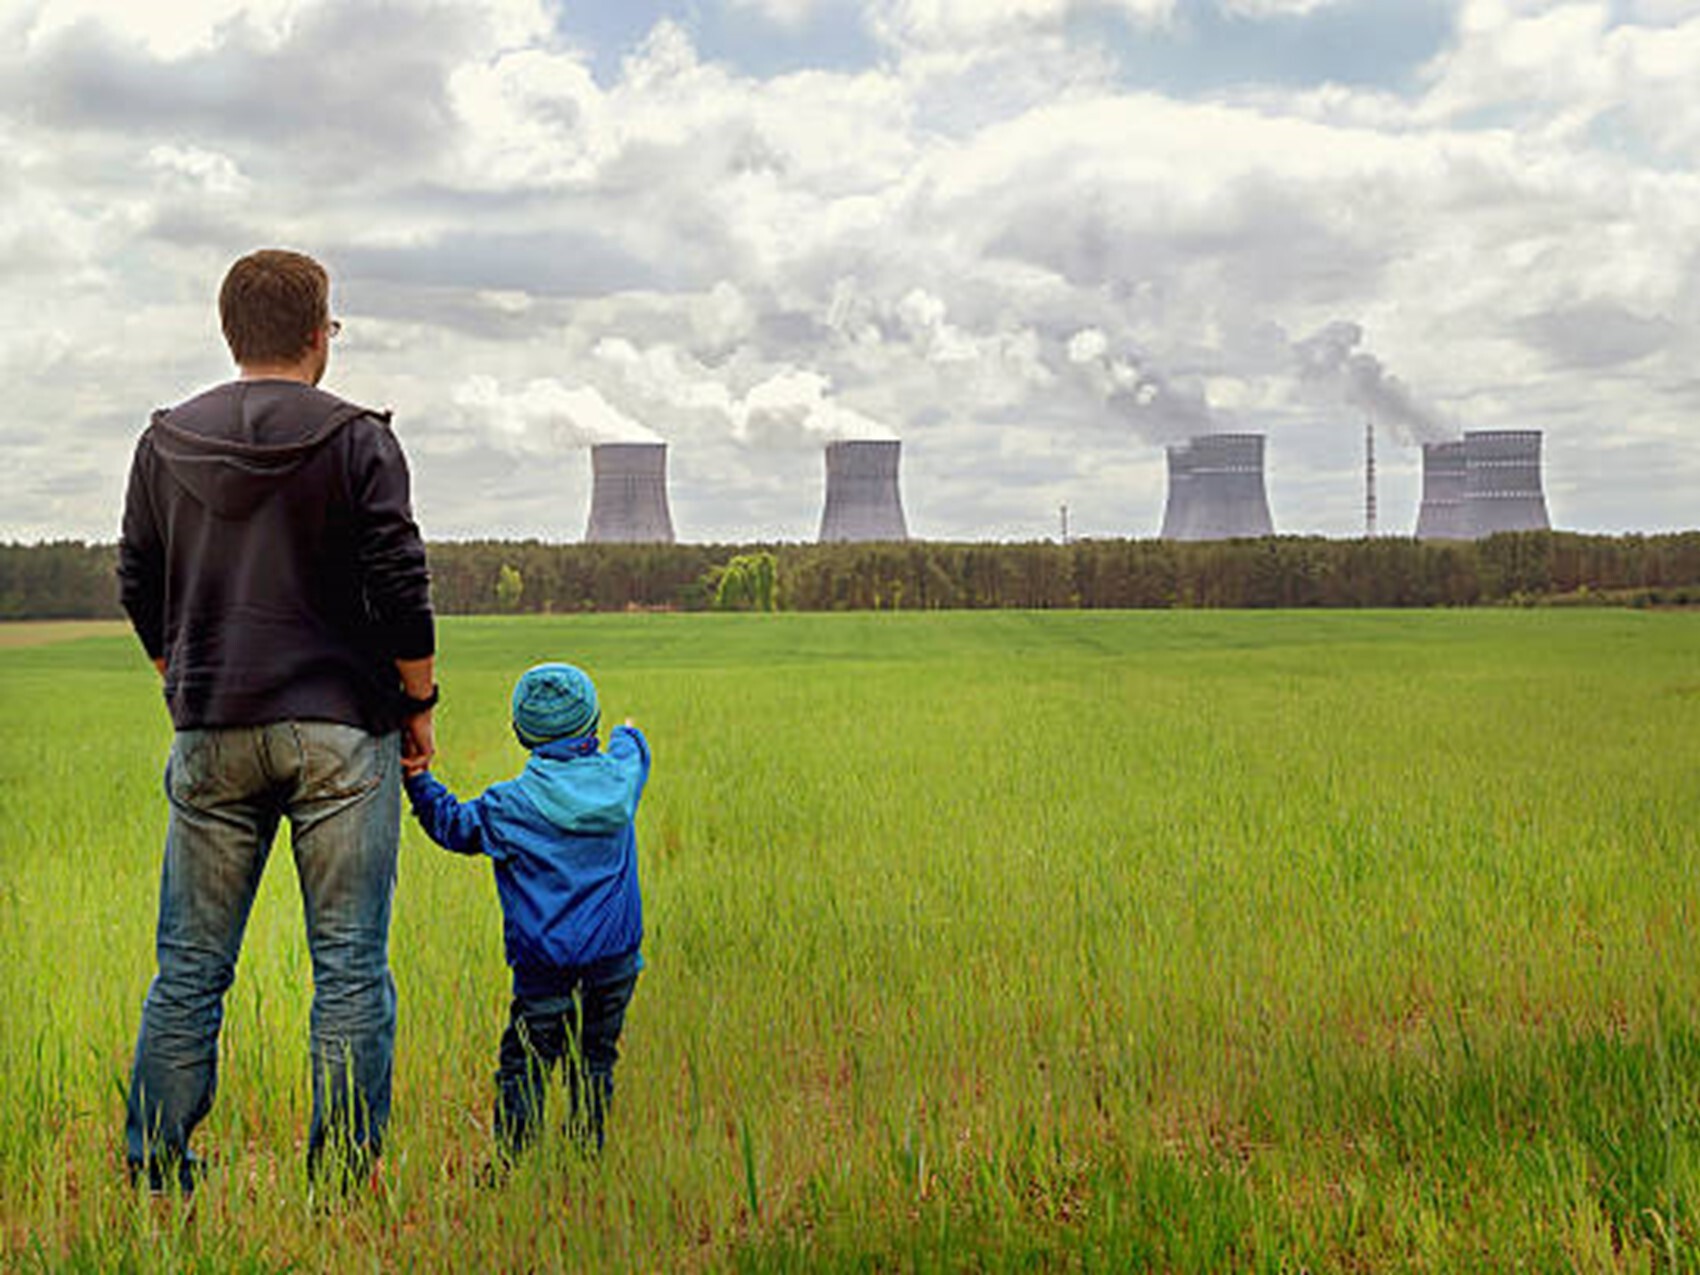 father and son standing in front of power stations